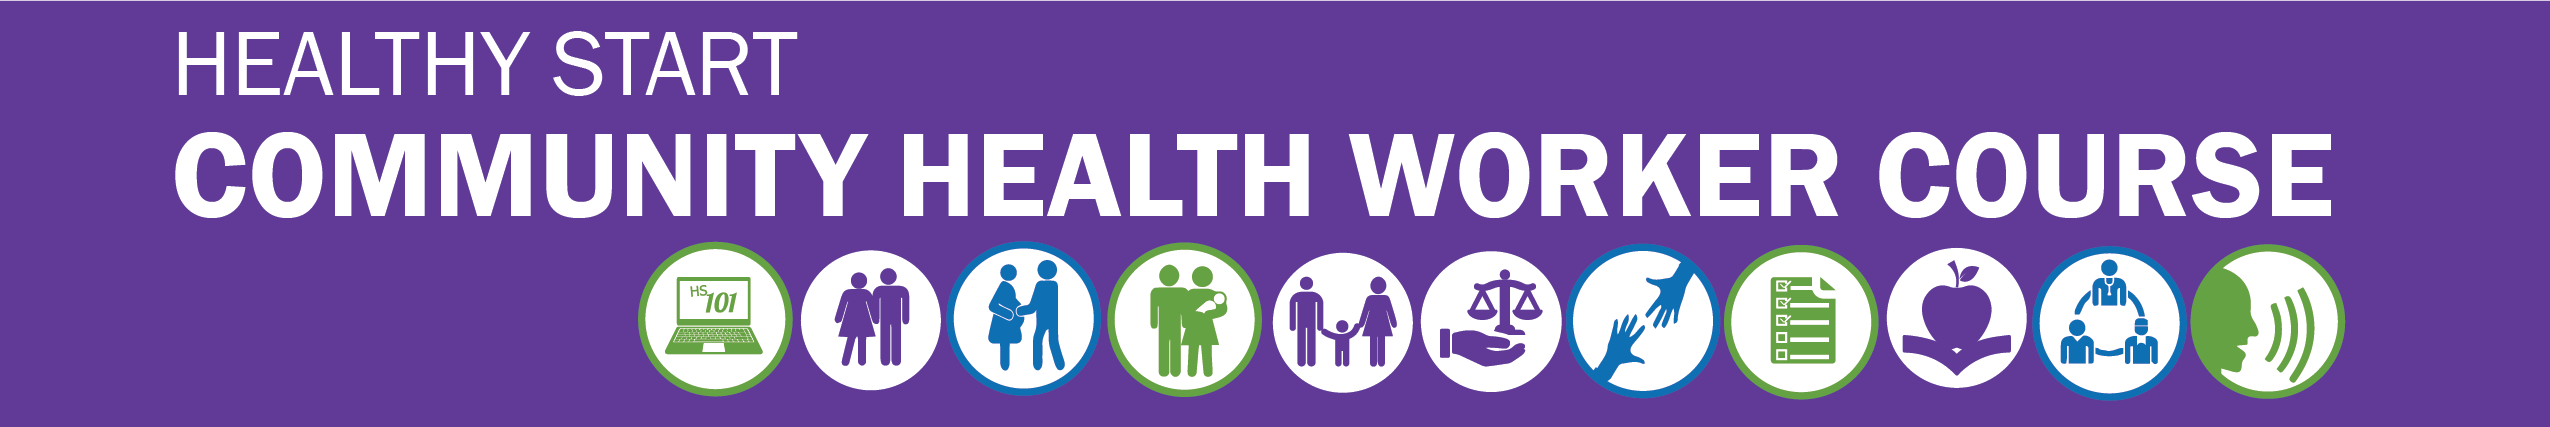 Healthy Start Community Health Worker Banner with Icons Representing the 11 Modules